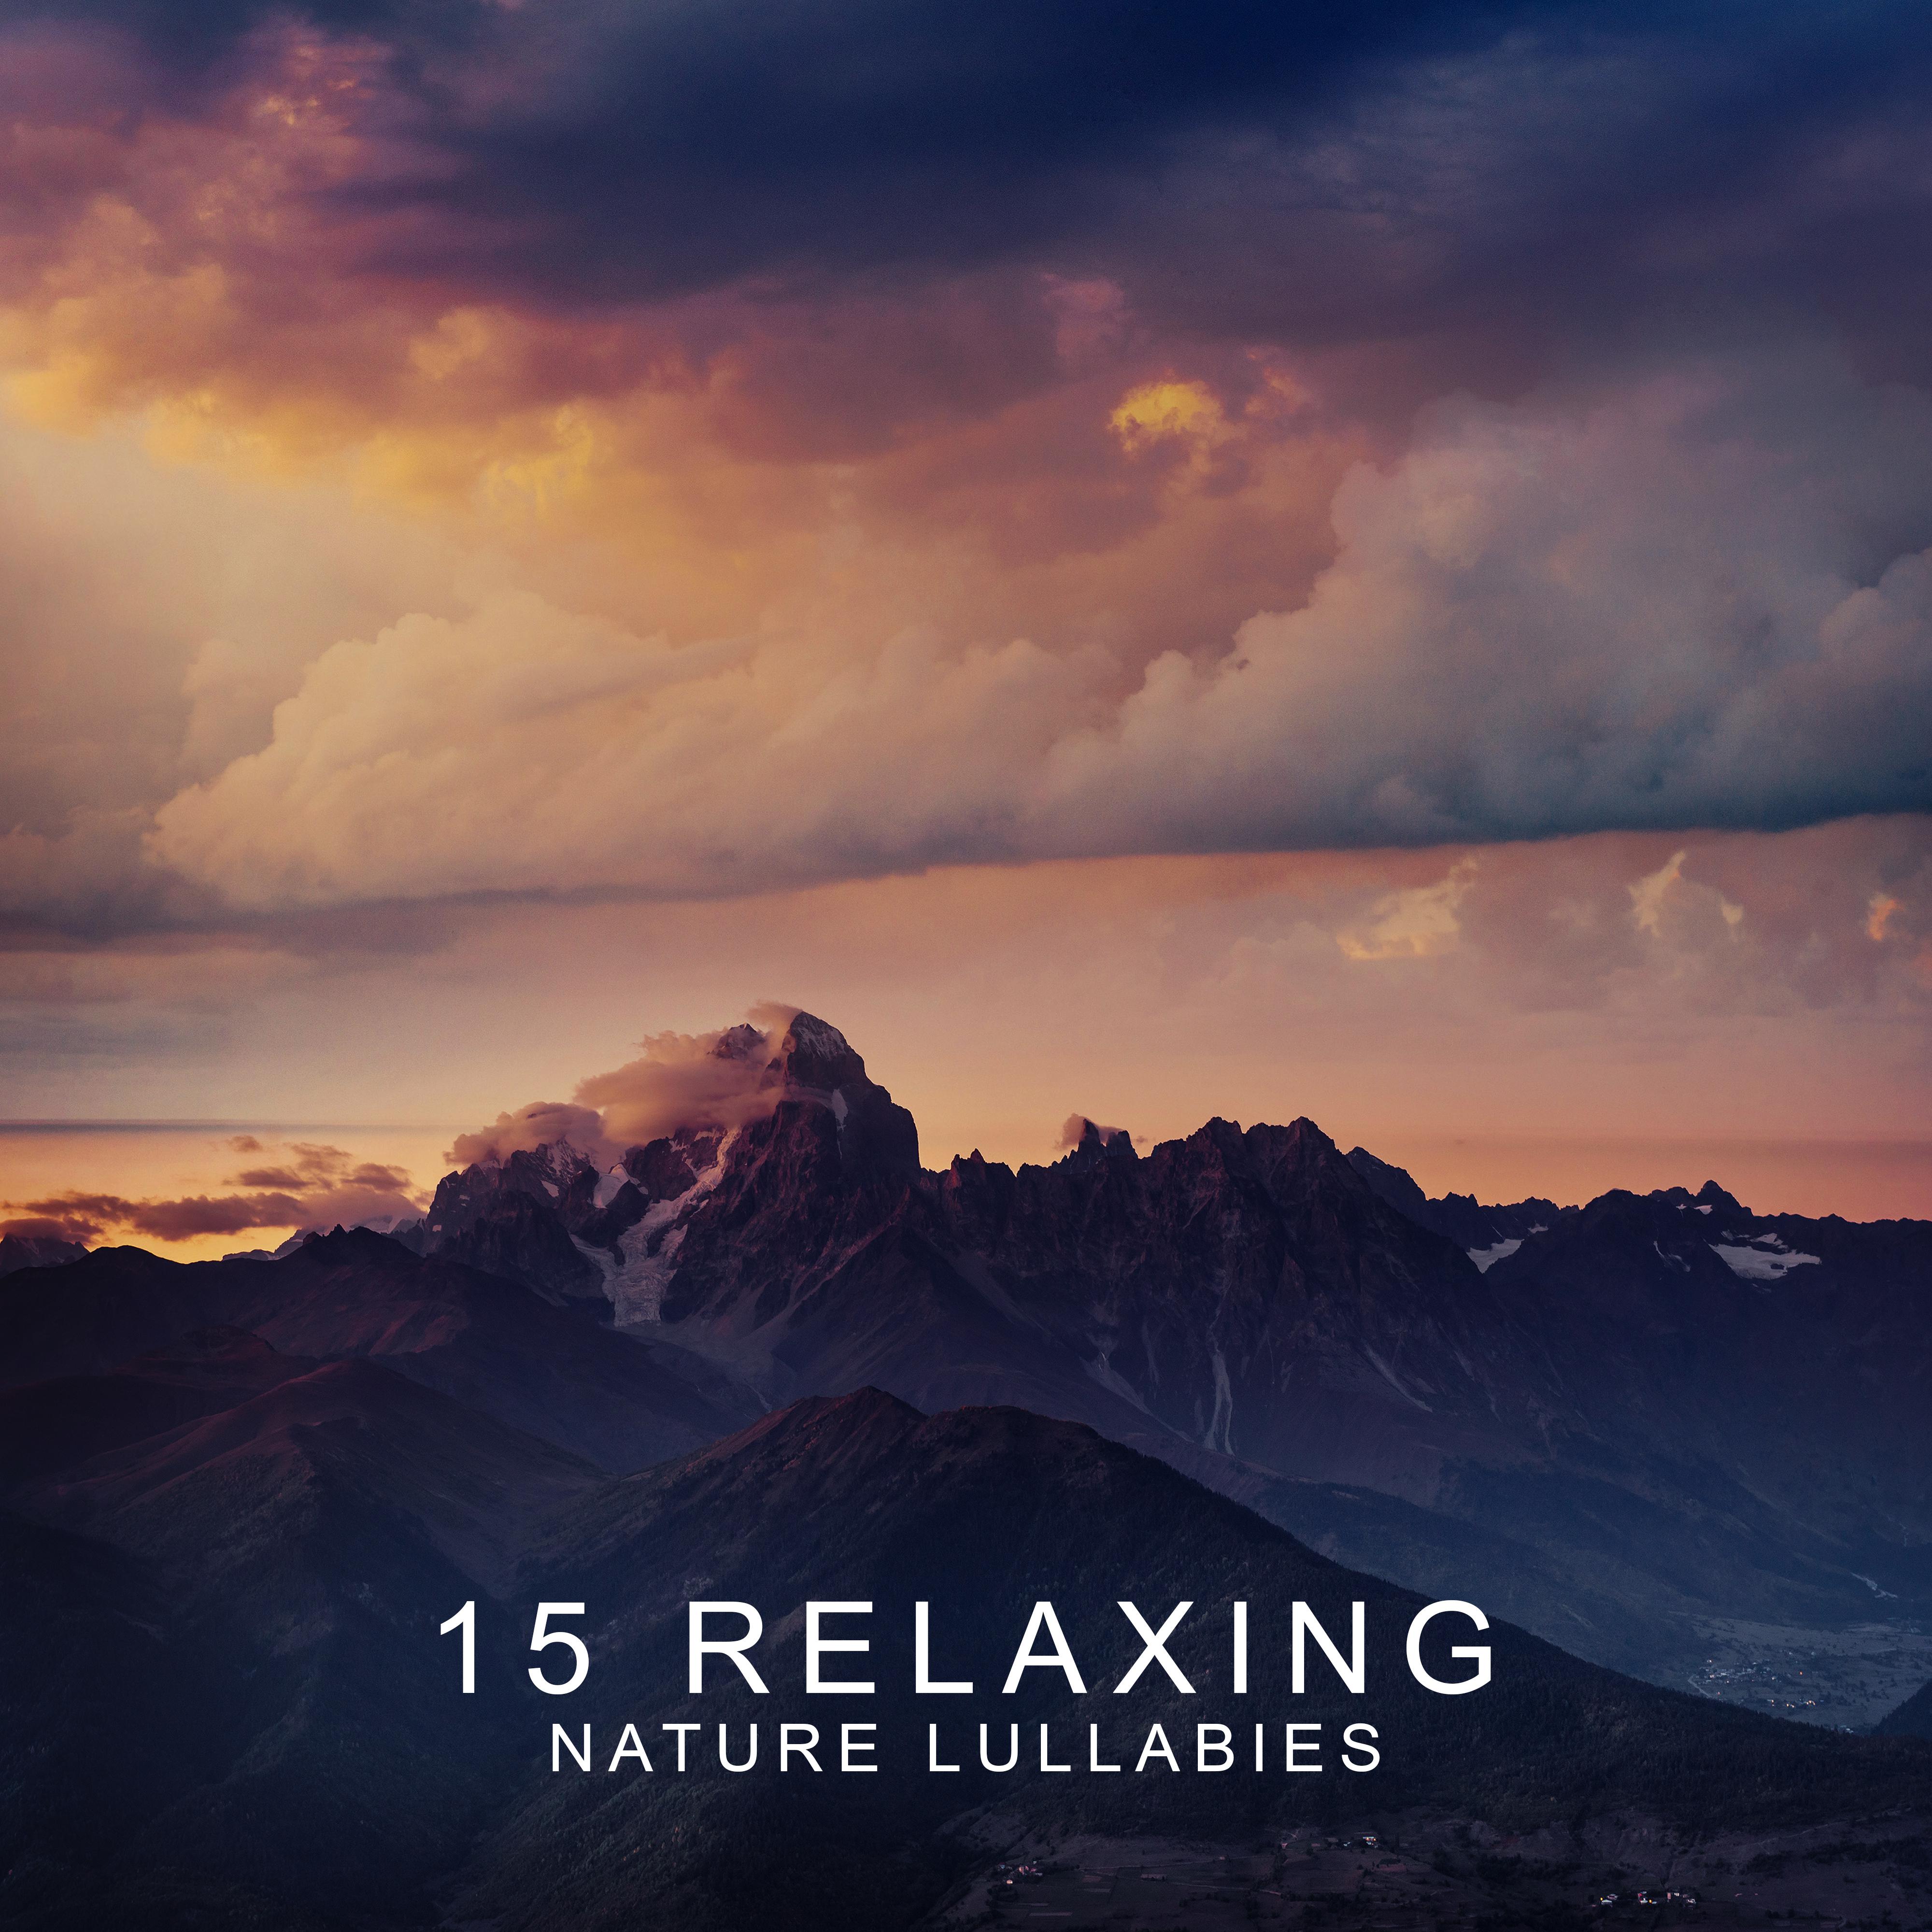 15 Relaxing Nature Lullabies: 2019 New Age Music for Perfect Relax & Inner Harmony, Nature Sounds of Birds, Forest Wind, Rain & Water Streams, Anti Stress Piano & Guitar Melodies